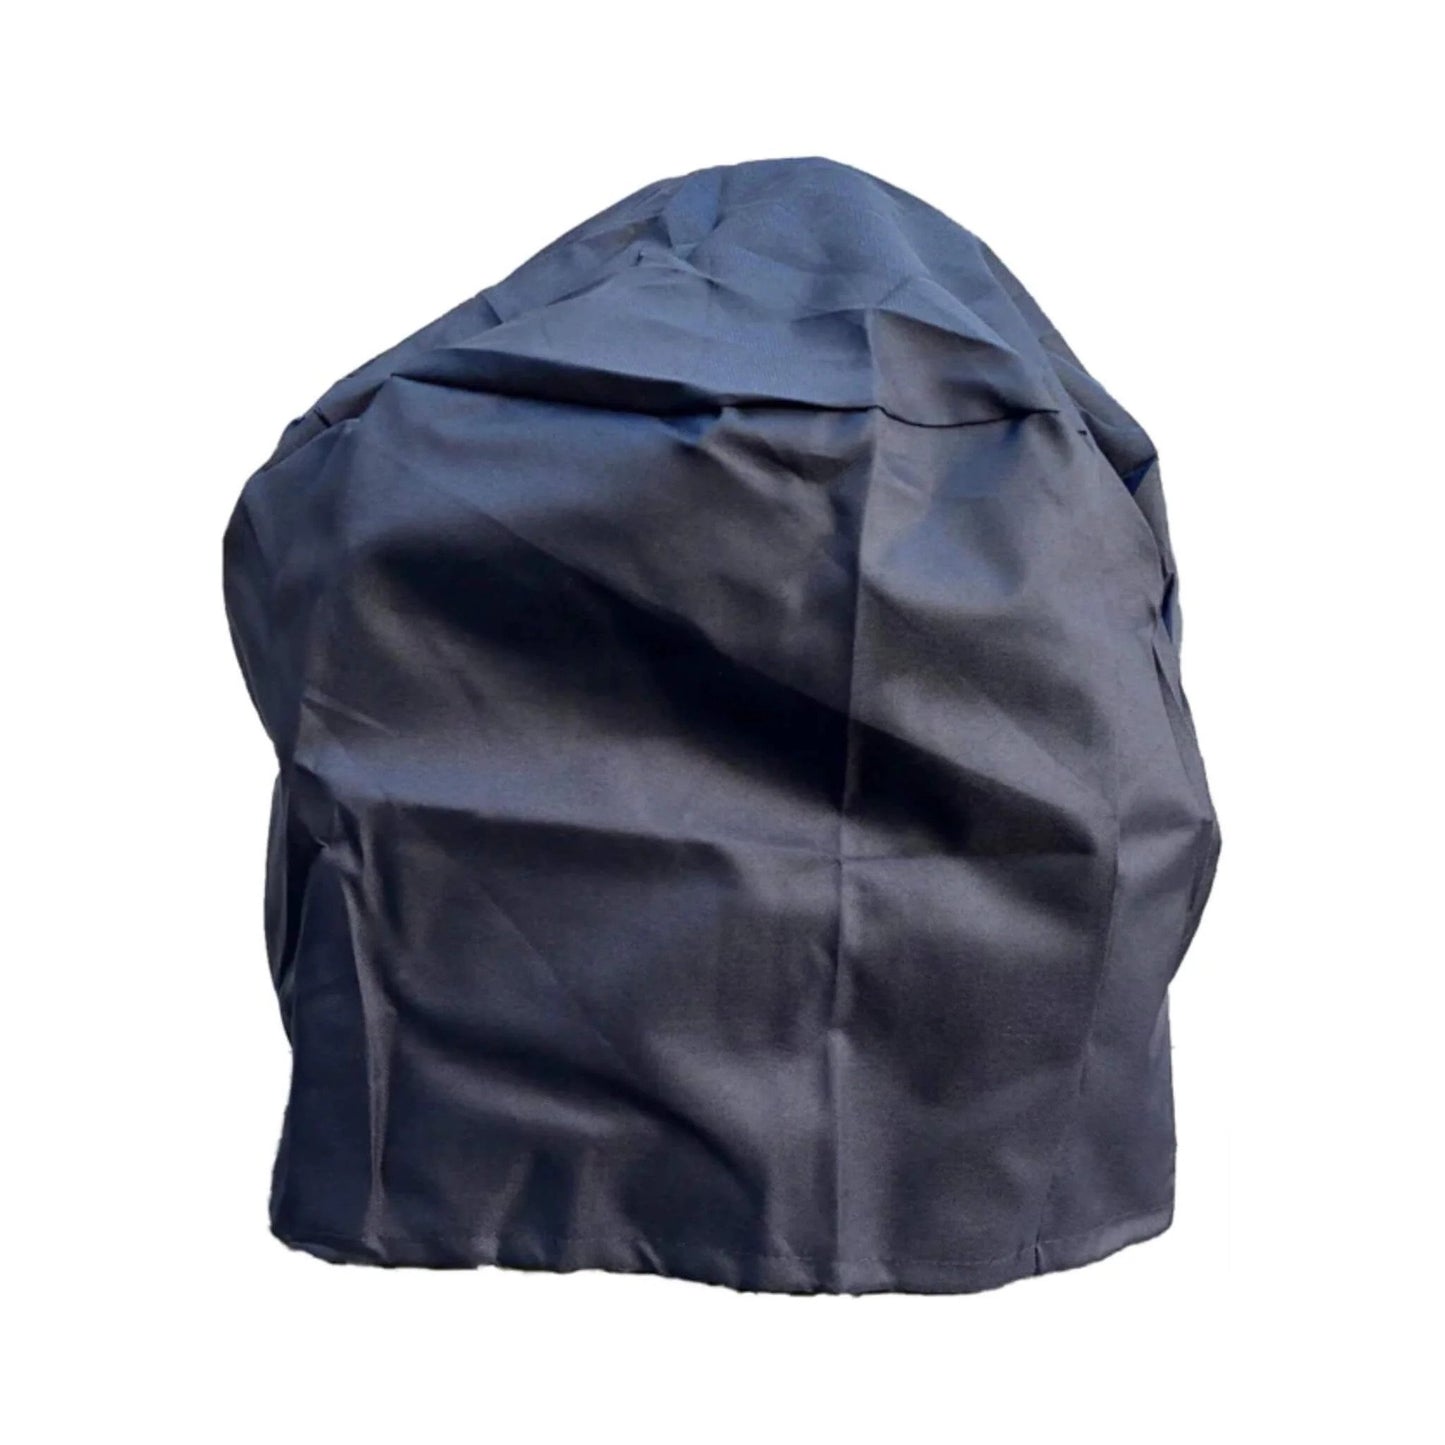 Protective 40-Inch OUTR Kamado Grill Cover: Shield Your Grill in Style